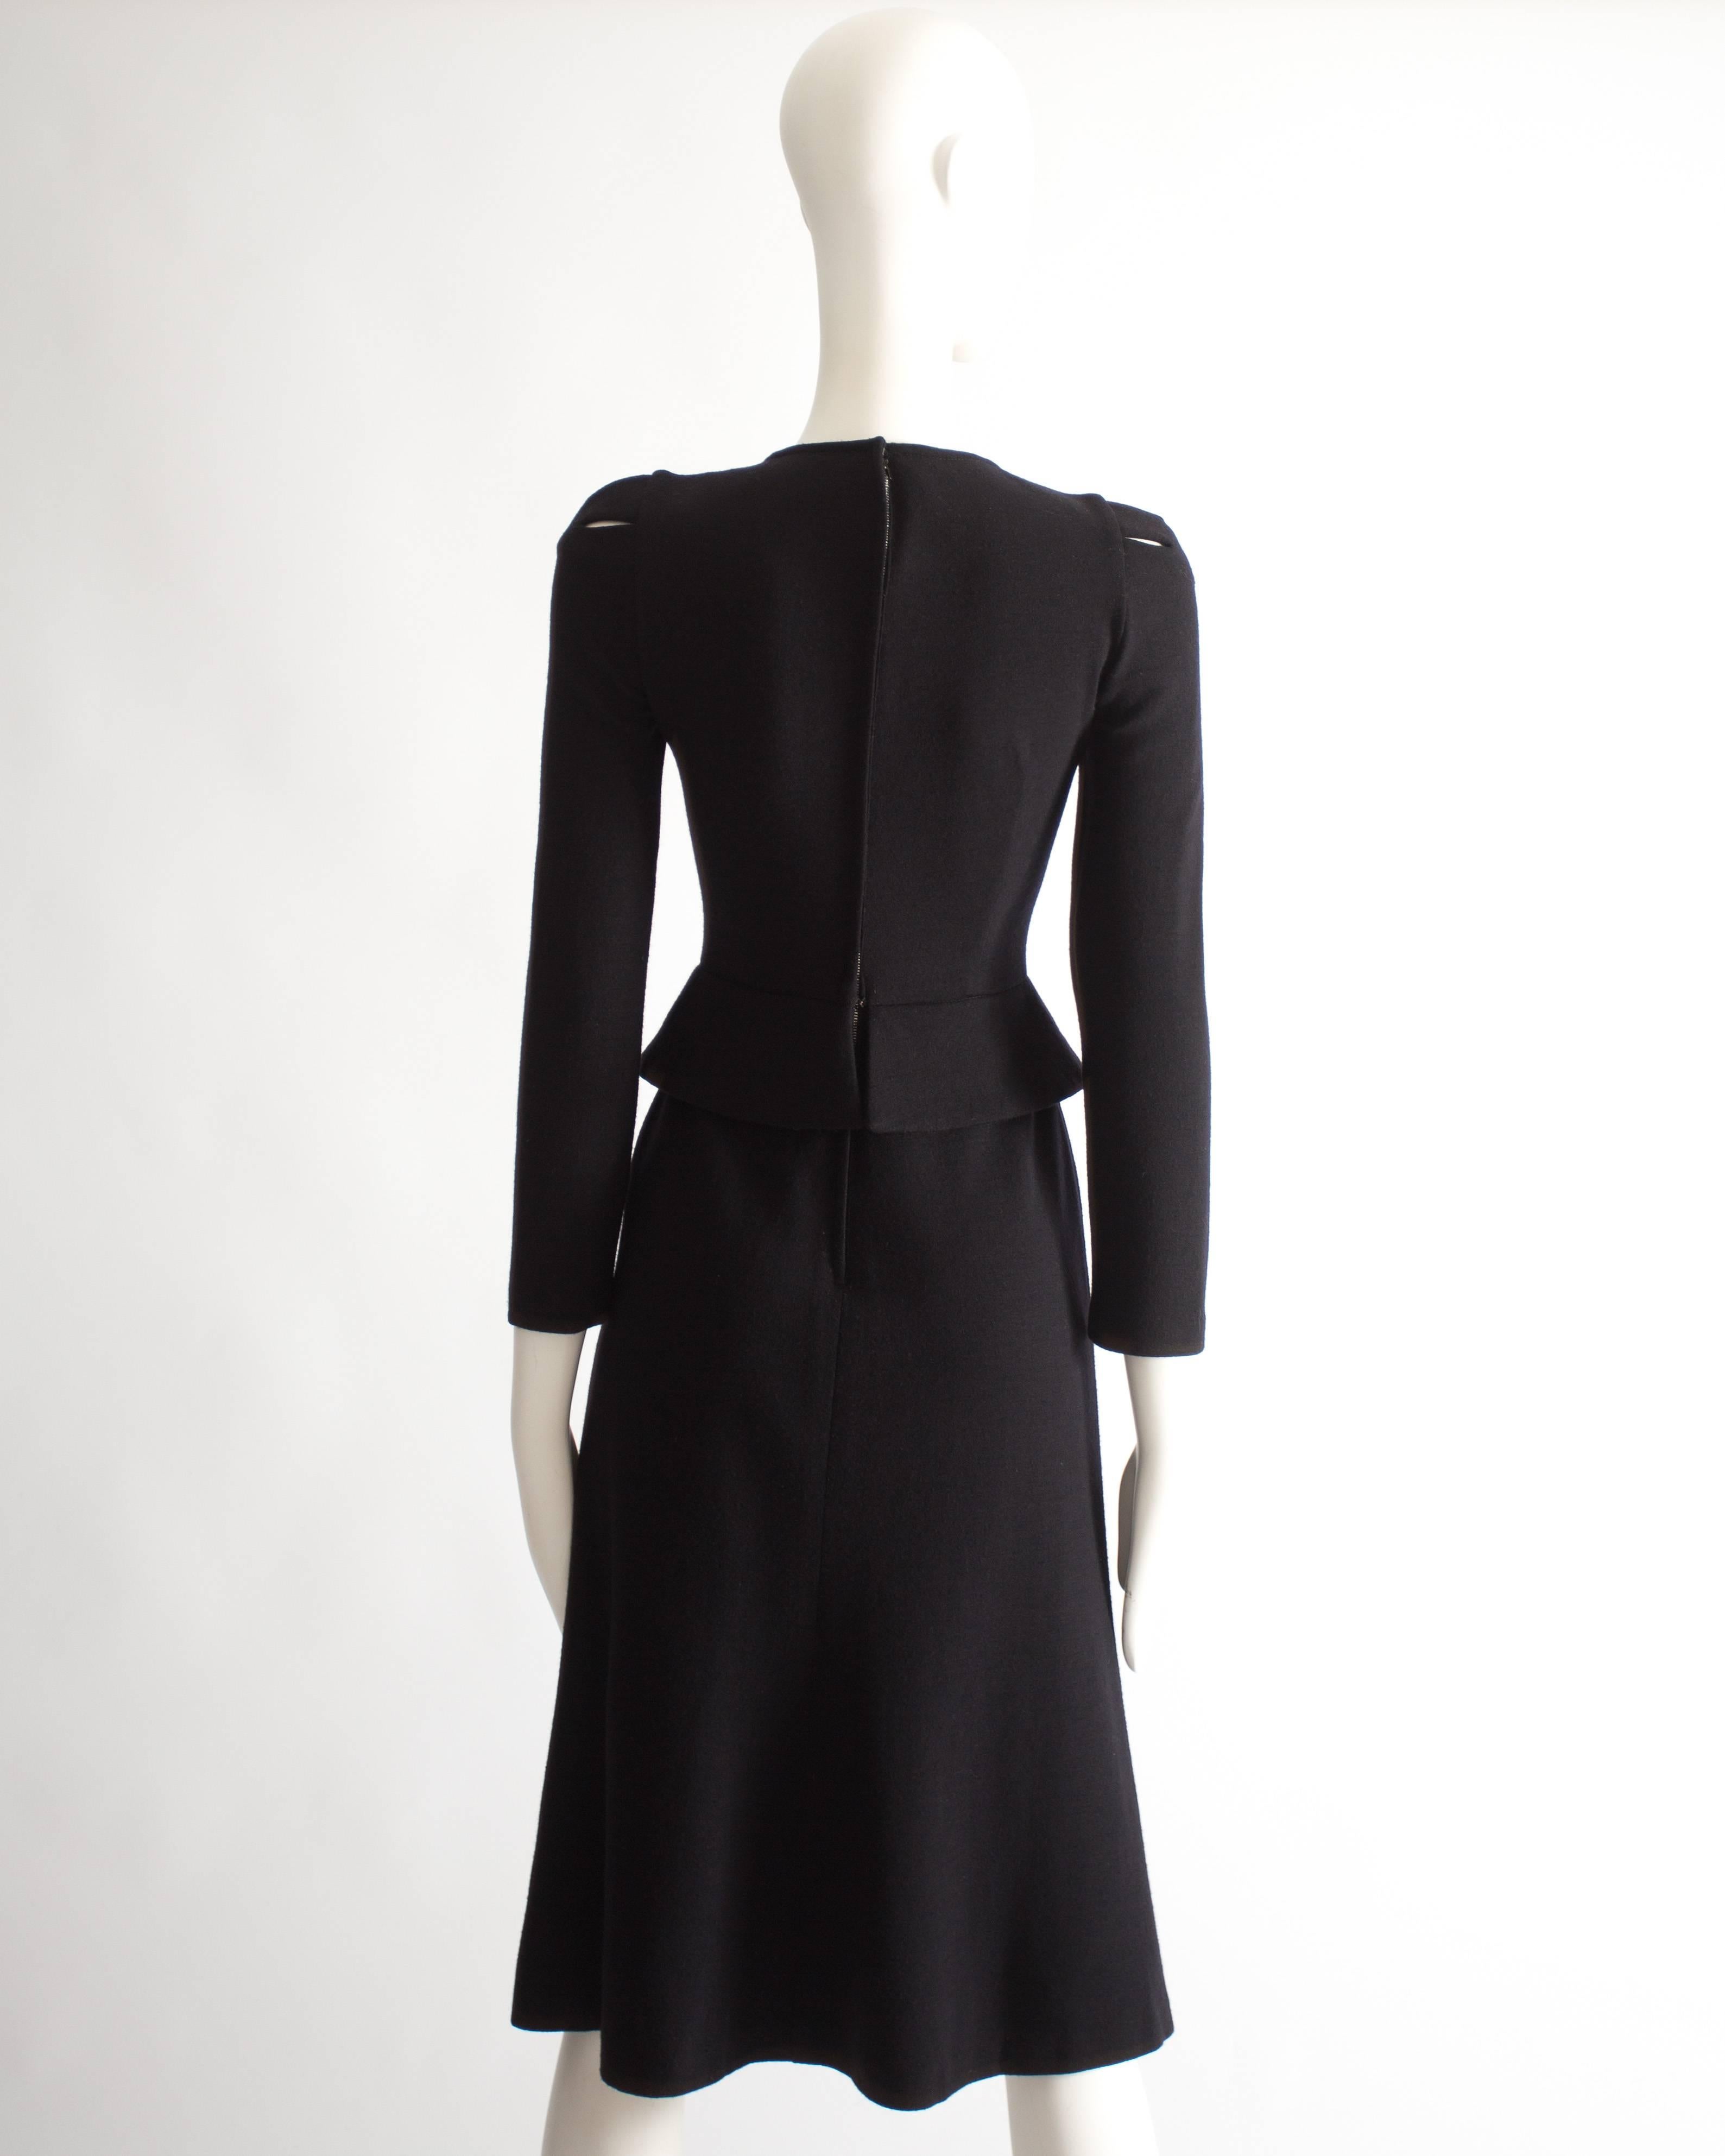 Ossie Clark black wool mid-length dress with cut-outs, Circa 1973 2